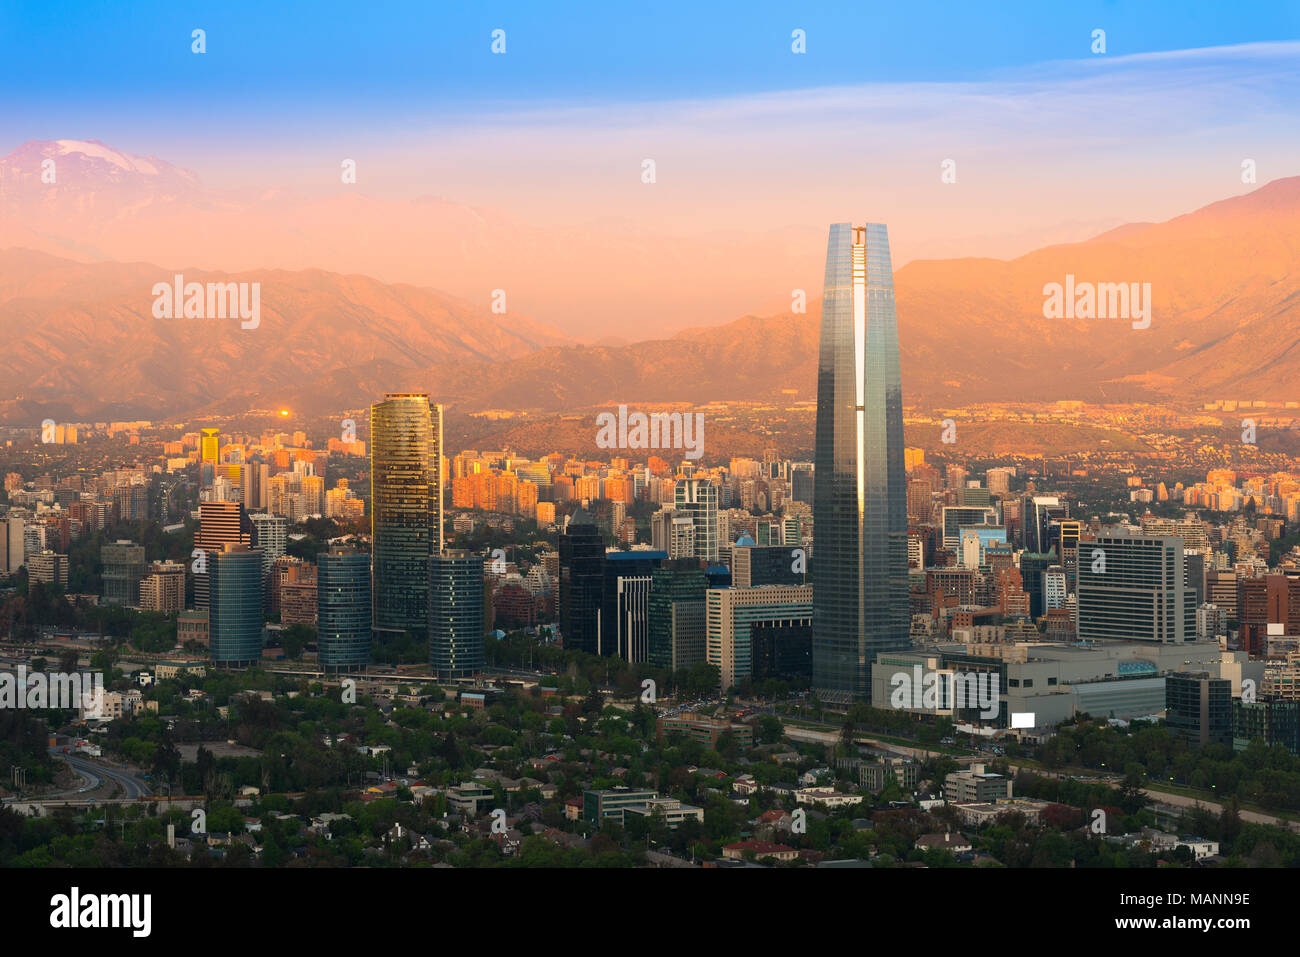 Panoramic view of Santiago de Chile at sunset Stock Photo